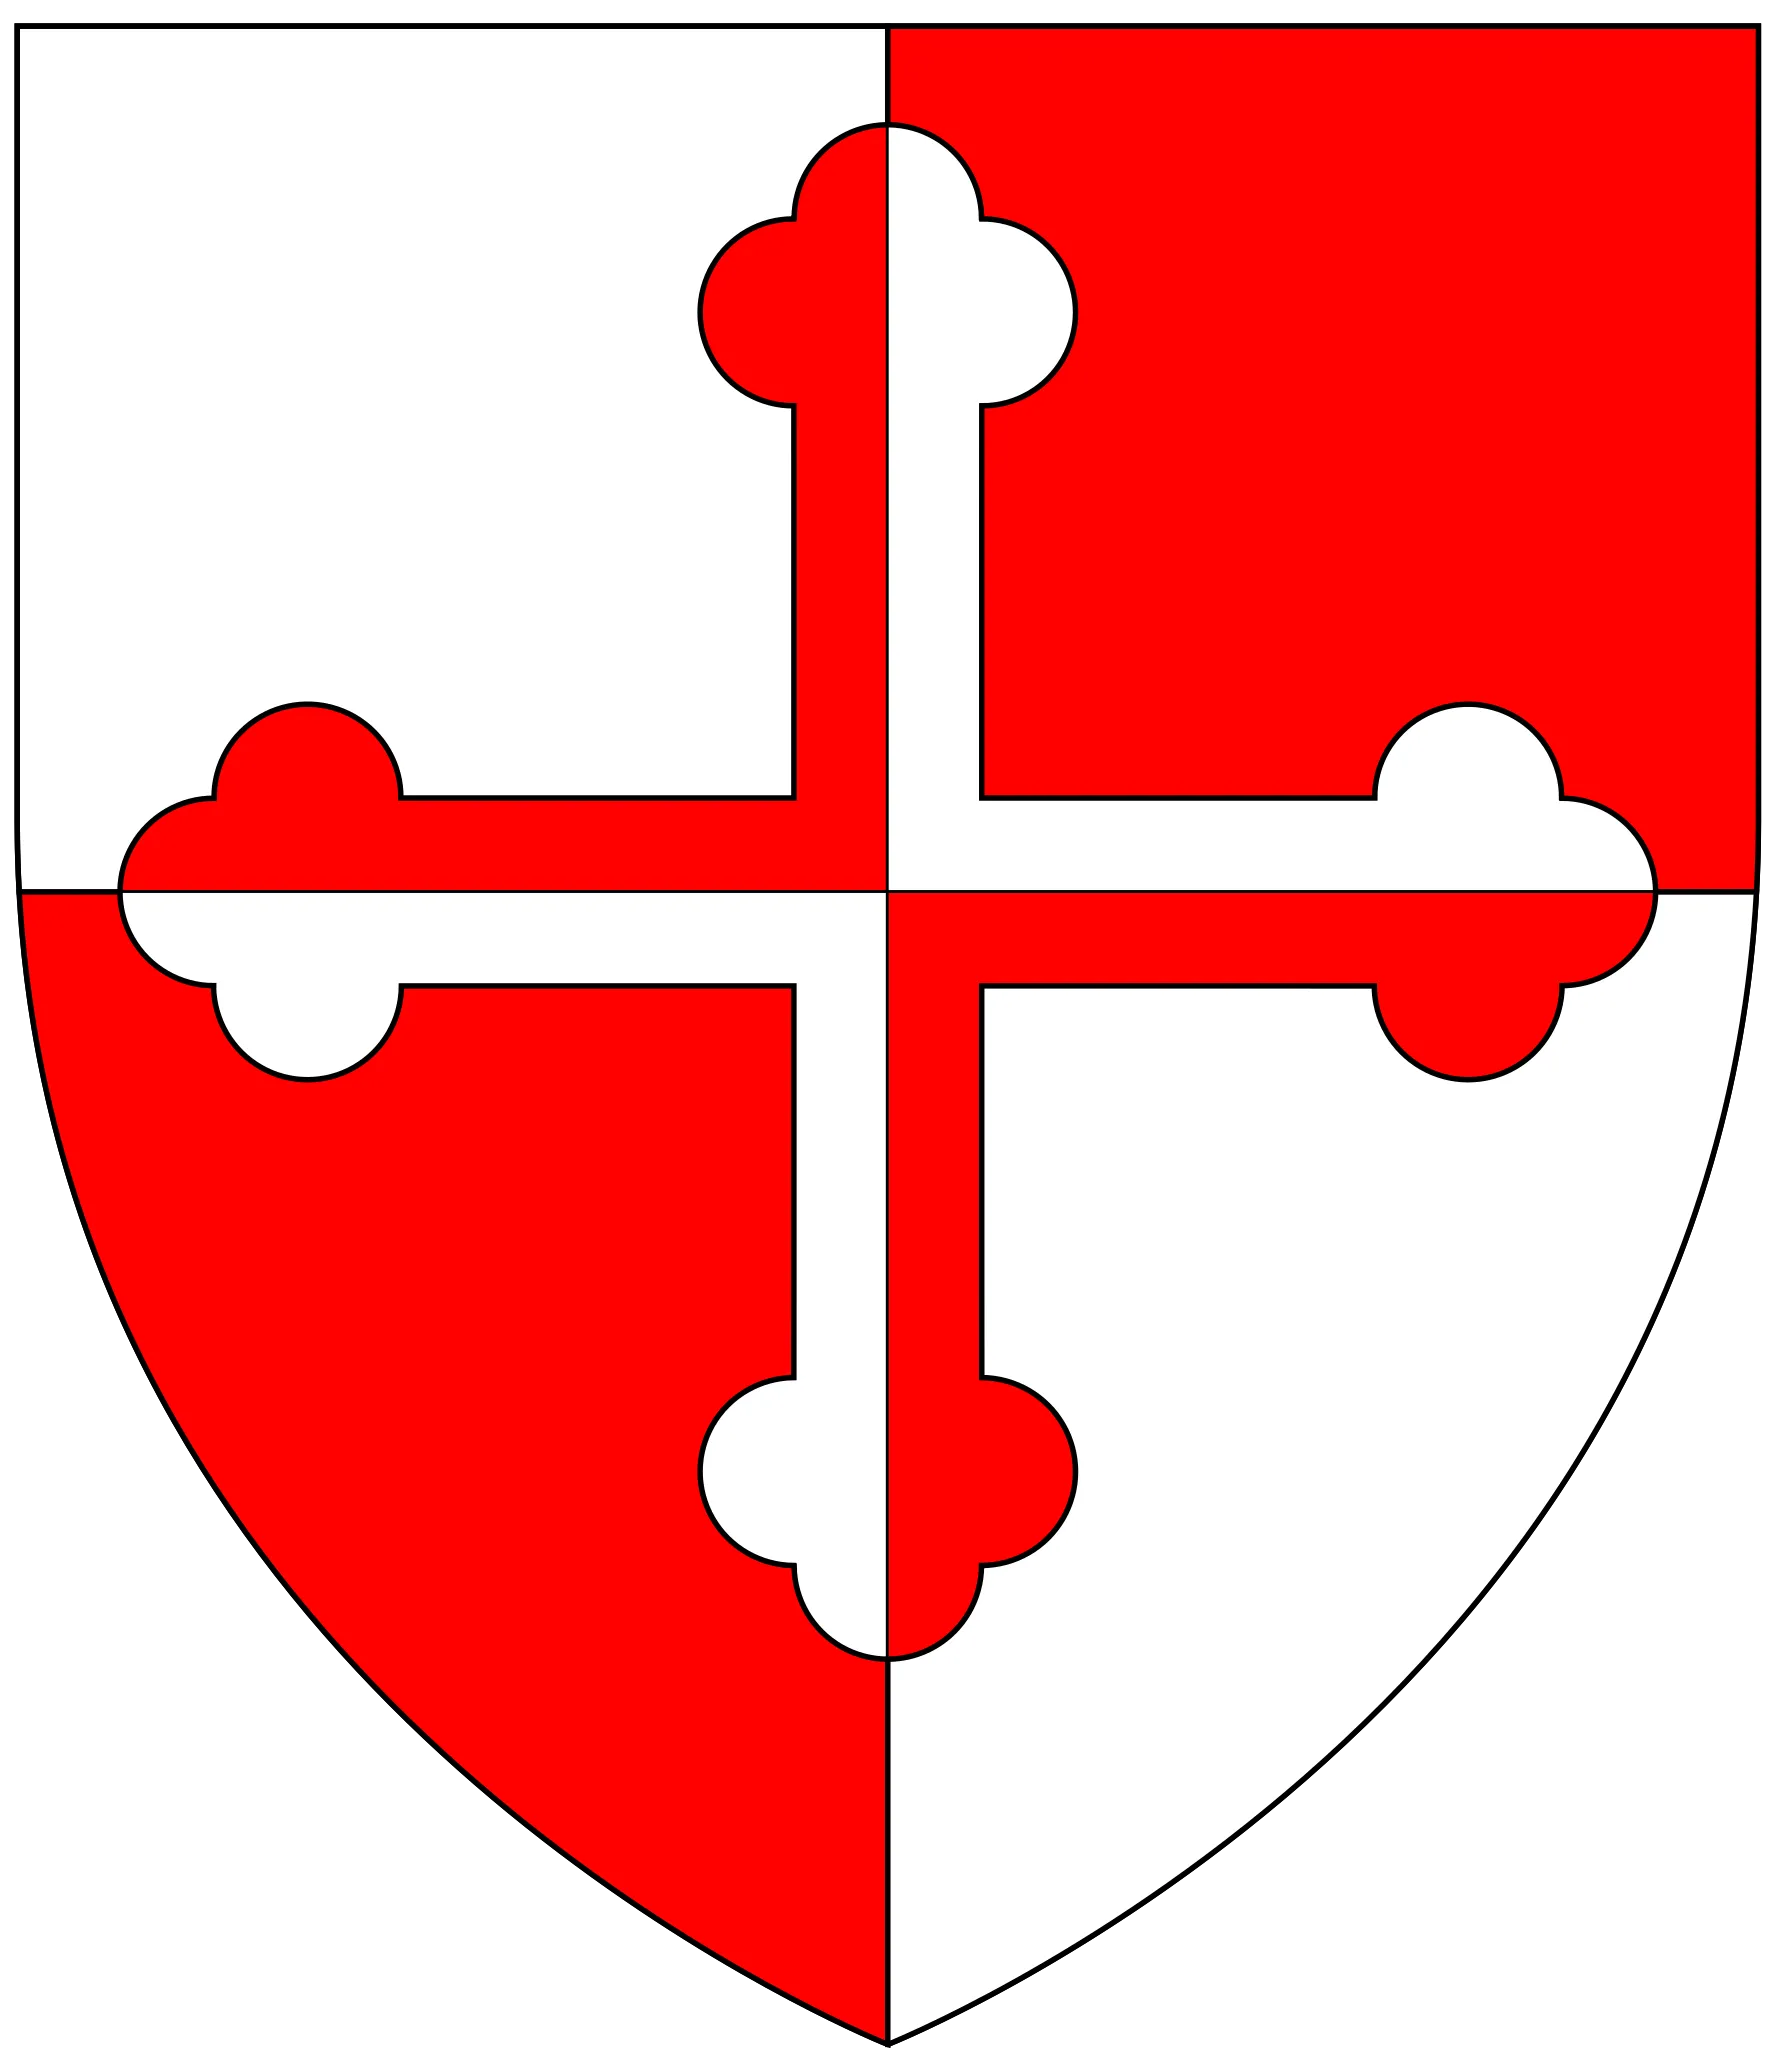 The Arms of Crossland